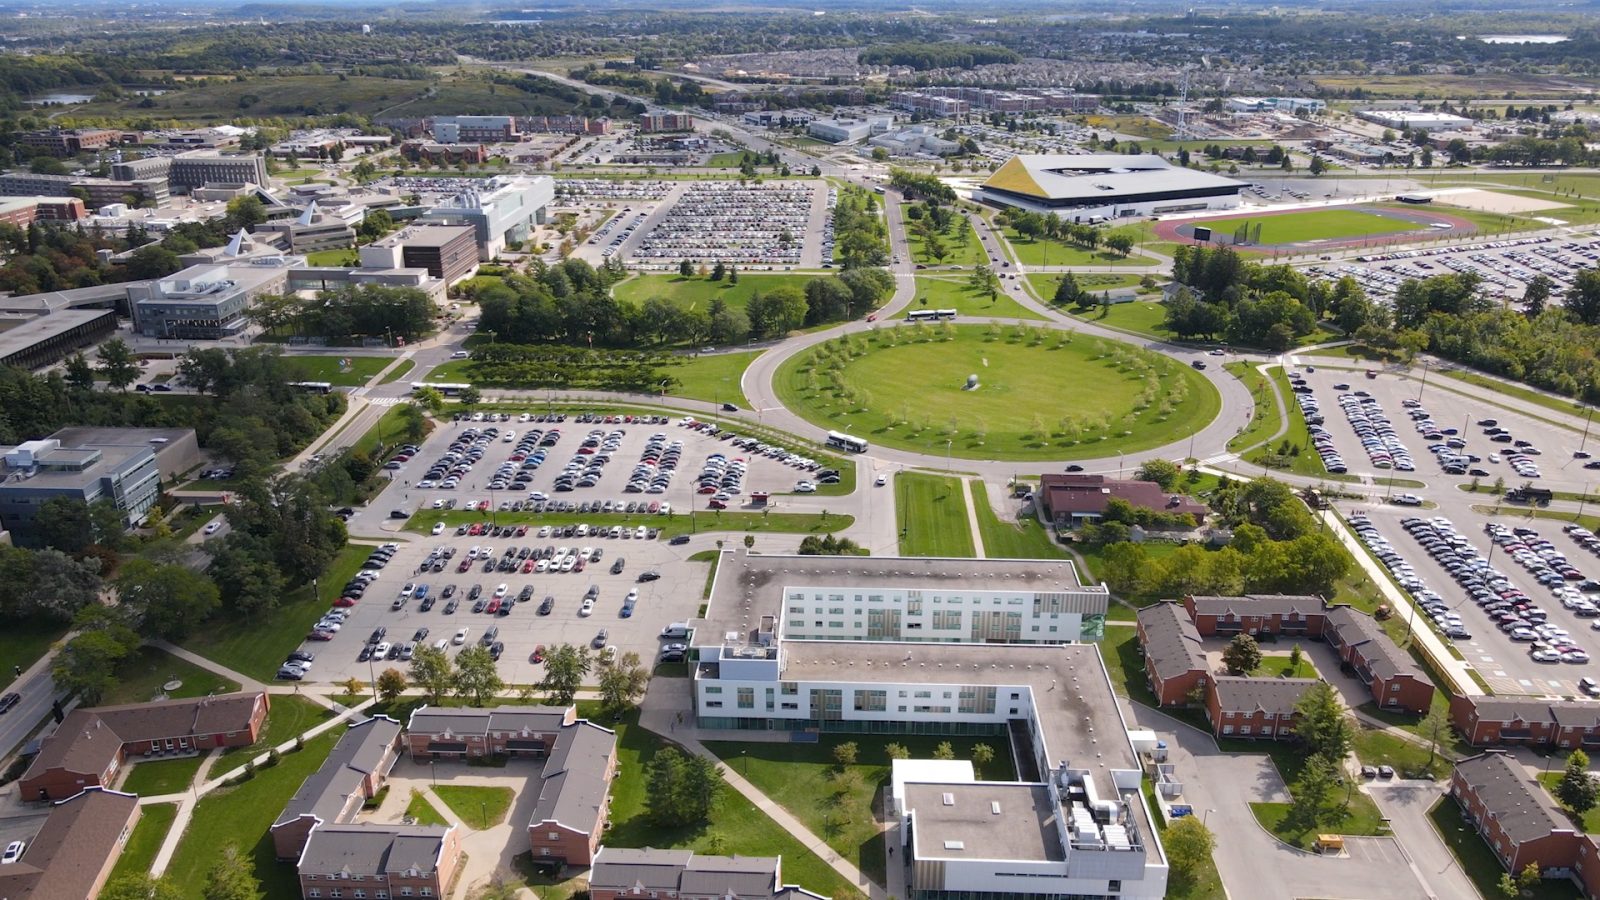 An aerial view of parking lots on Brock University's campus.